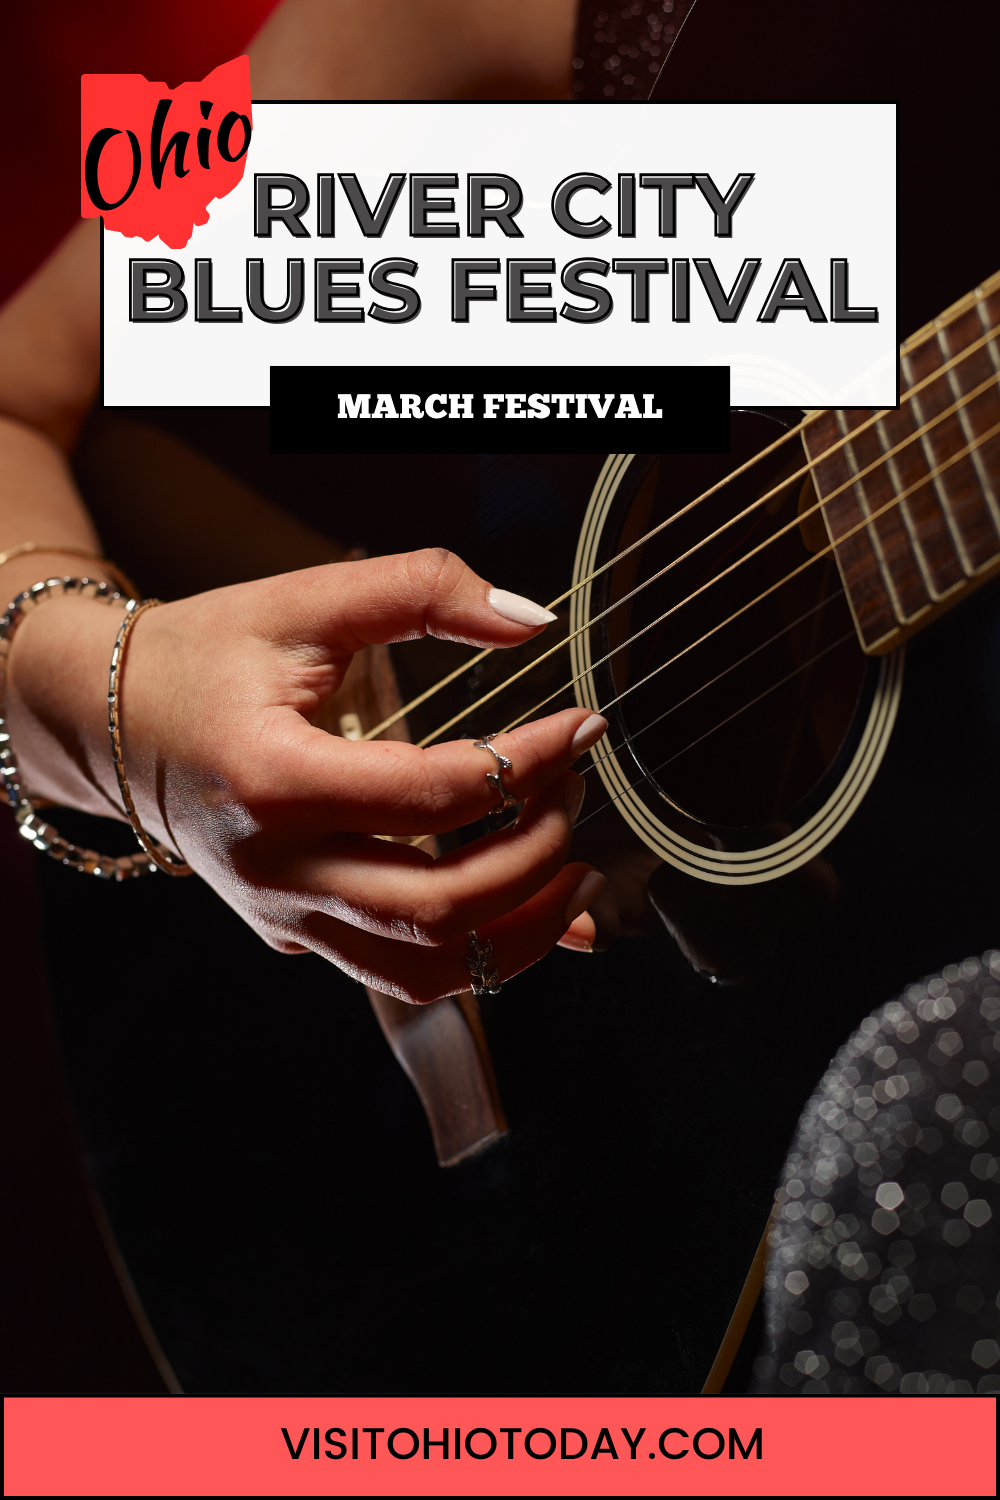 The River City Blues Festival is a celebration of rhythm and blues music. Held in mid-March at the Lafayette Hotel in Marietta.